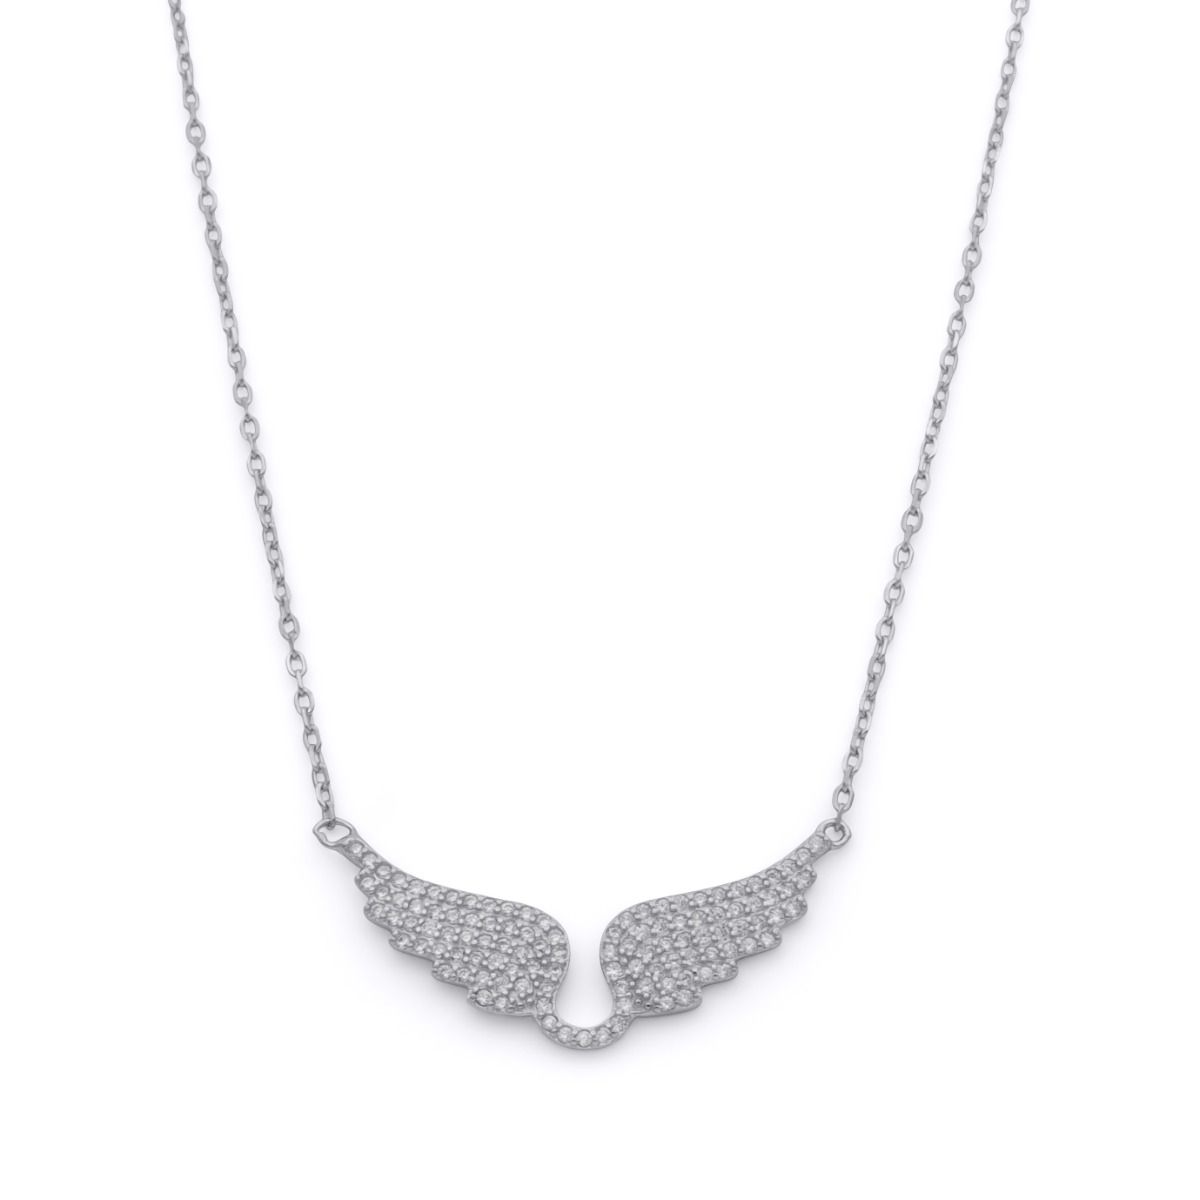 Angel Wing Necklace  Fine jewelry solid silver gold-finish necklaces  bracelets earrings